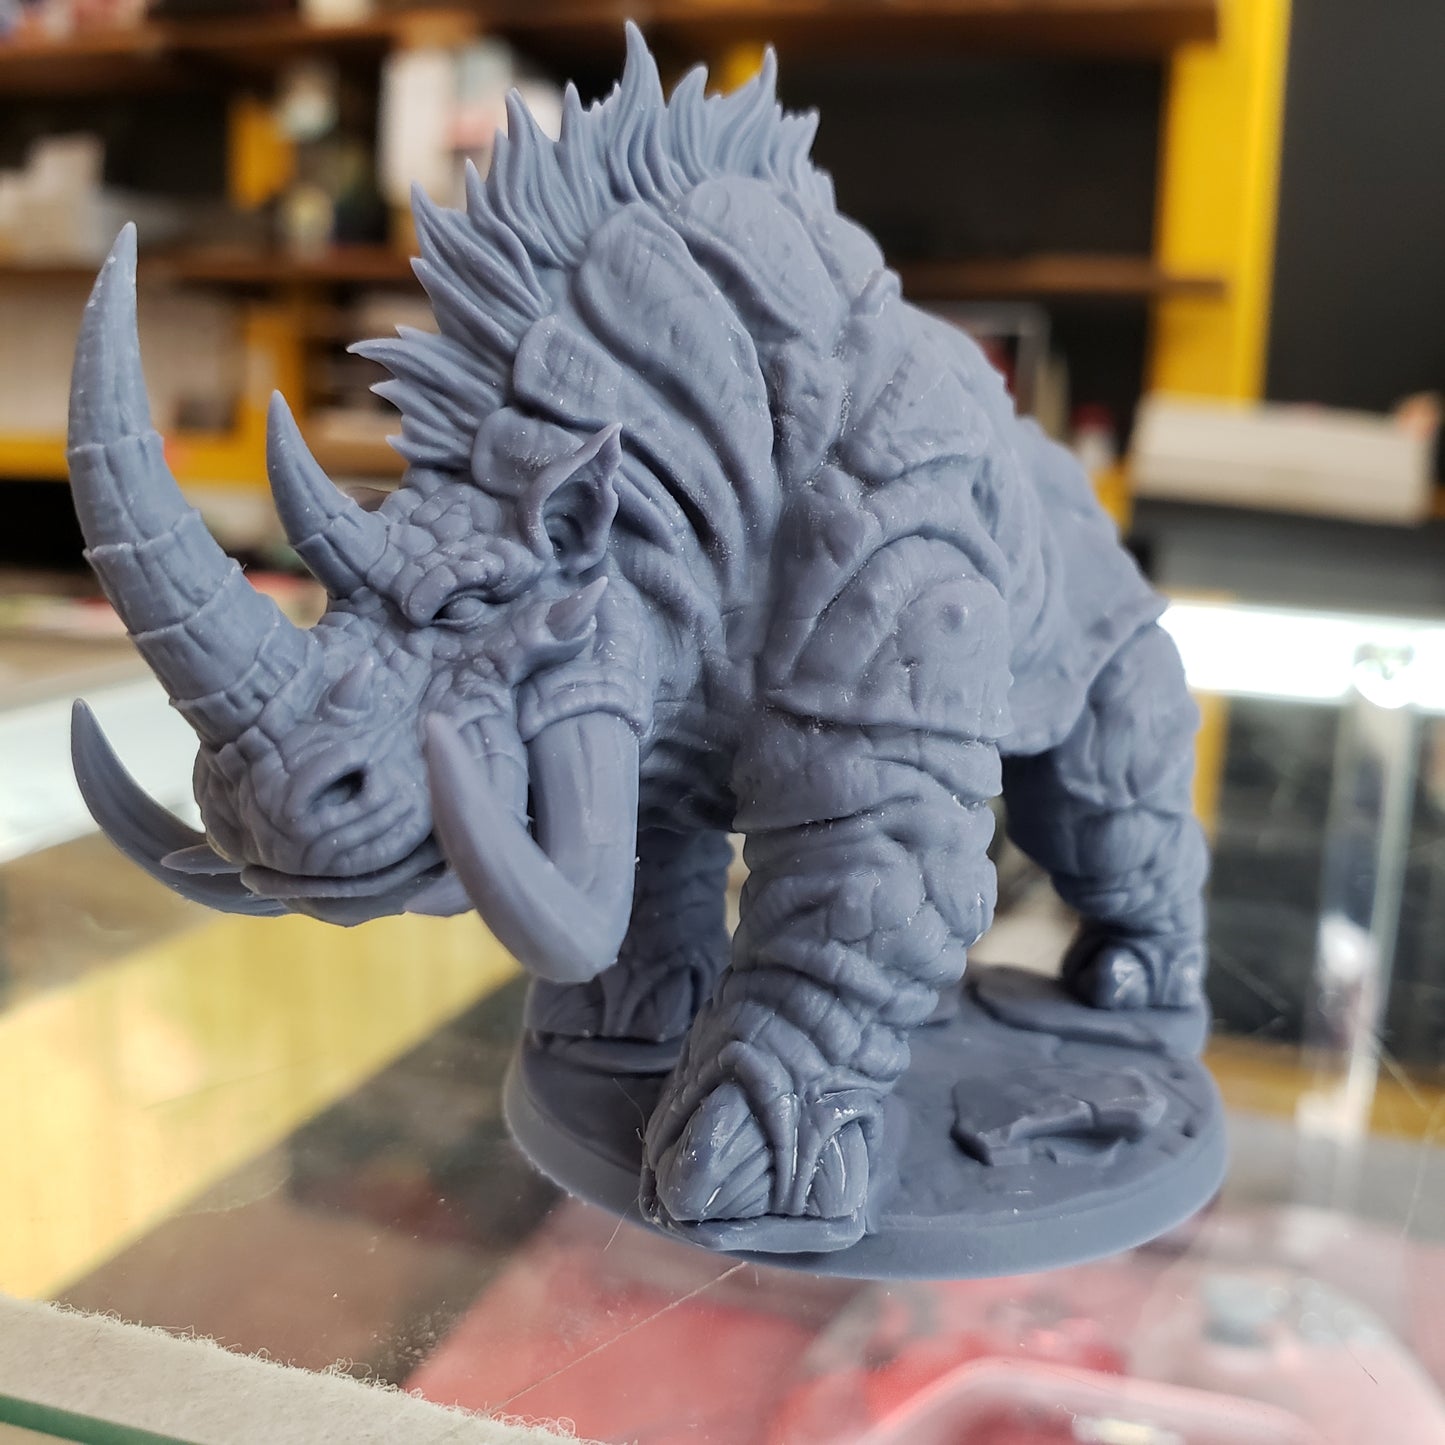 Image shows an example of a 3D printed wild behemot gaming miniature printed in-house at All Systems Go